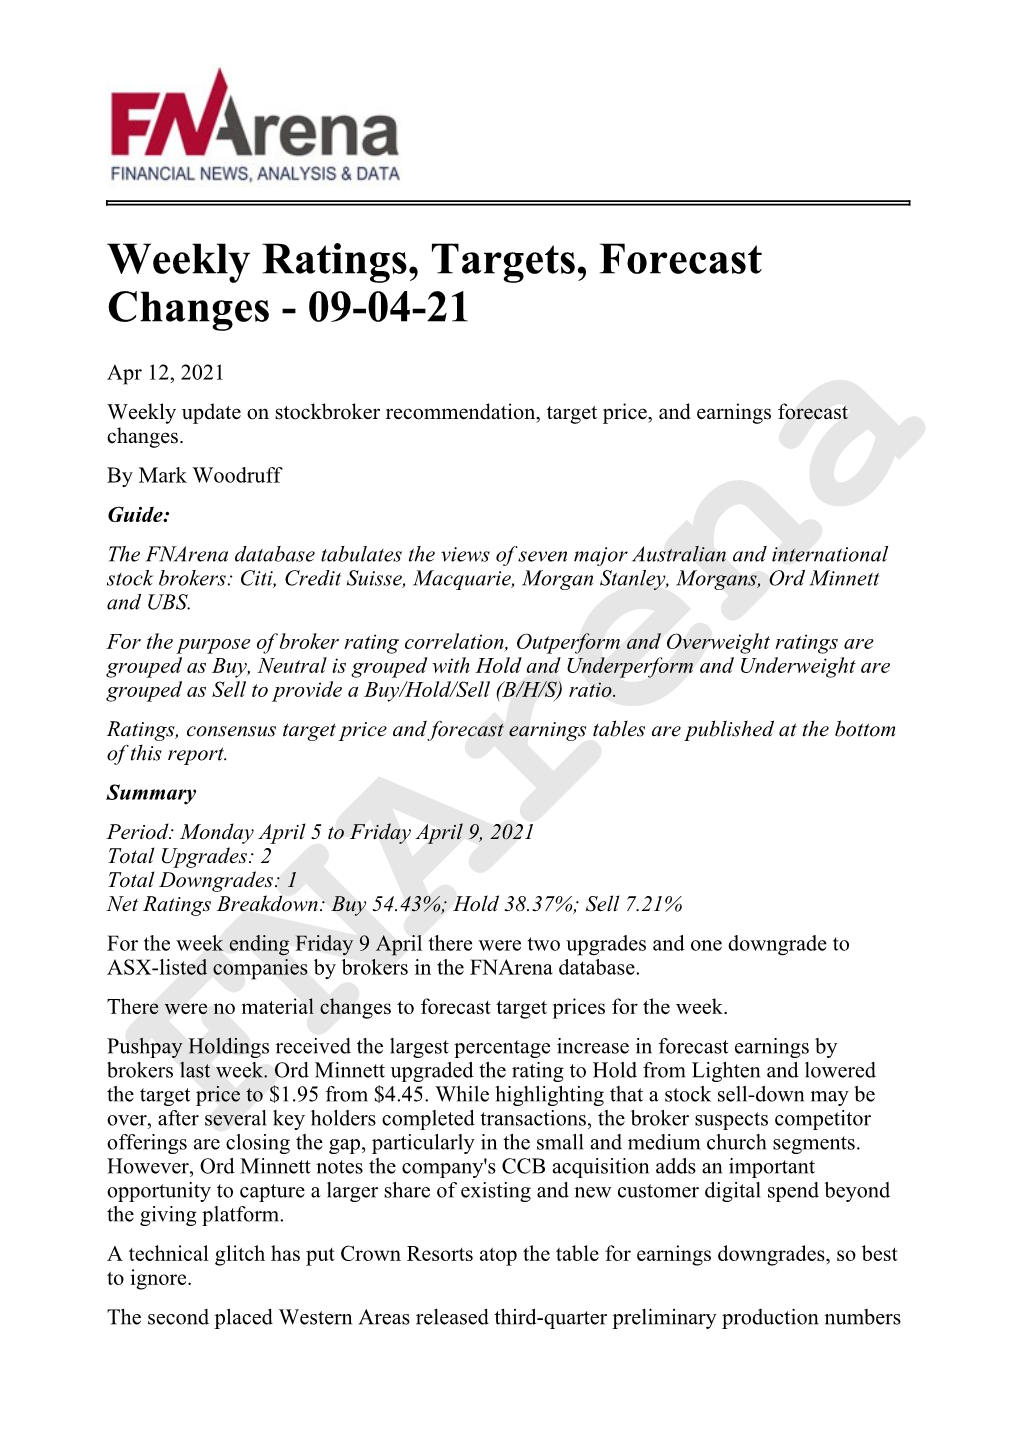 Weekly Ratings, Targets, Forecast Changes - 09-04-21